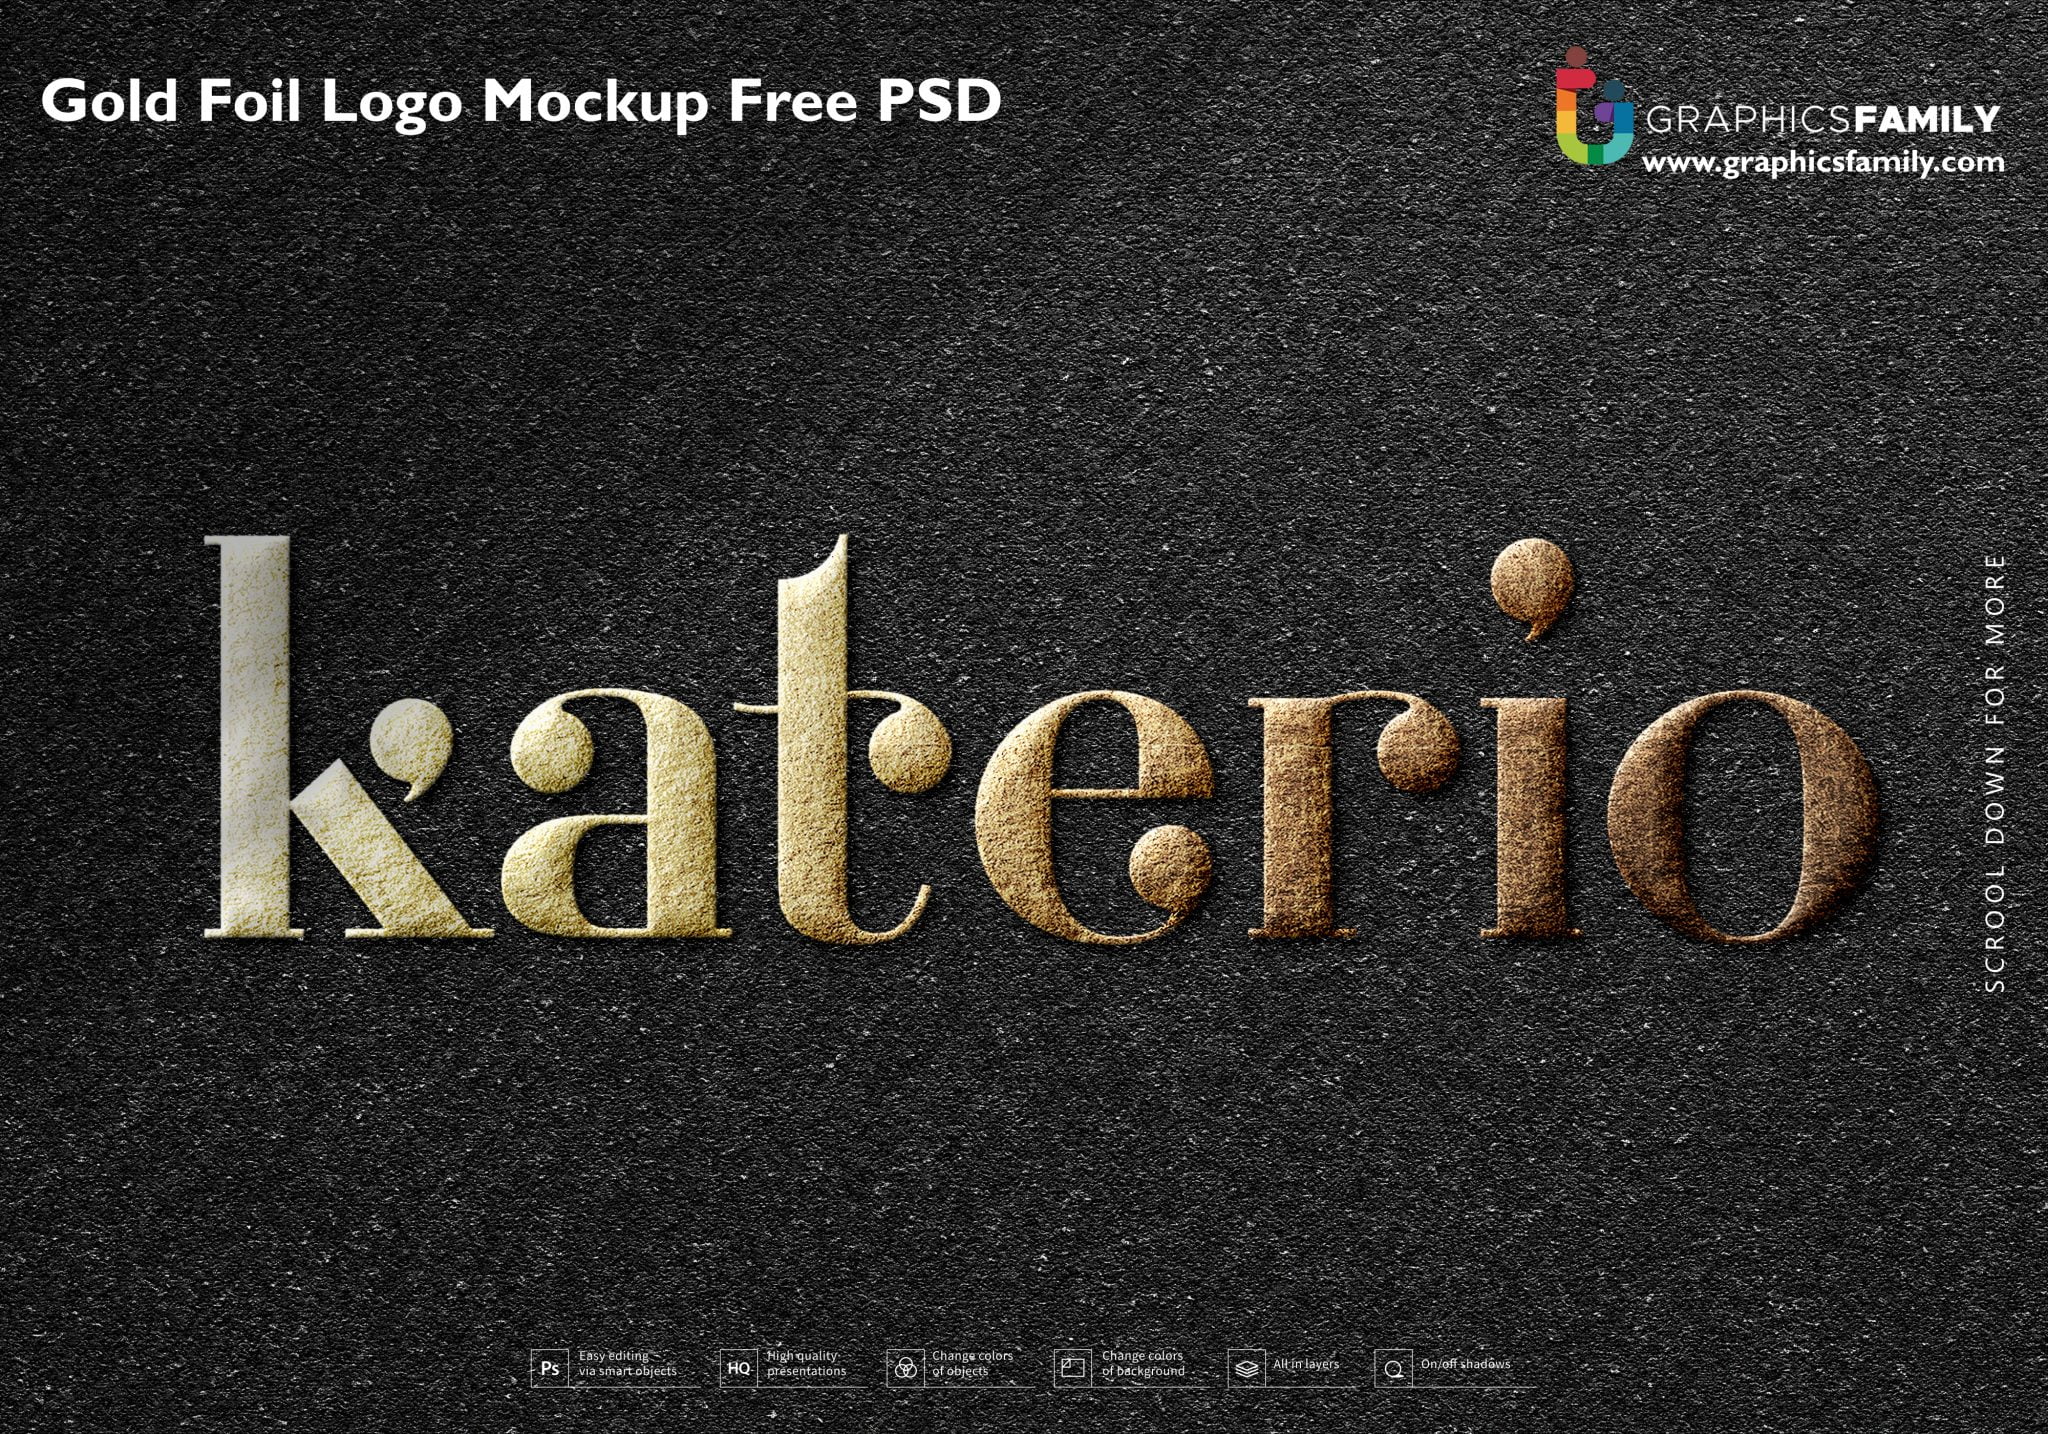 Download Gold Foil Logo Mockup Free PSD - GraphicsFamily